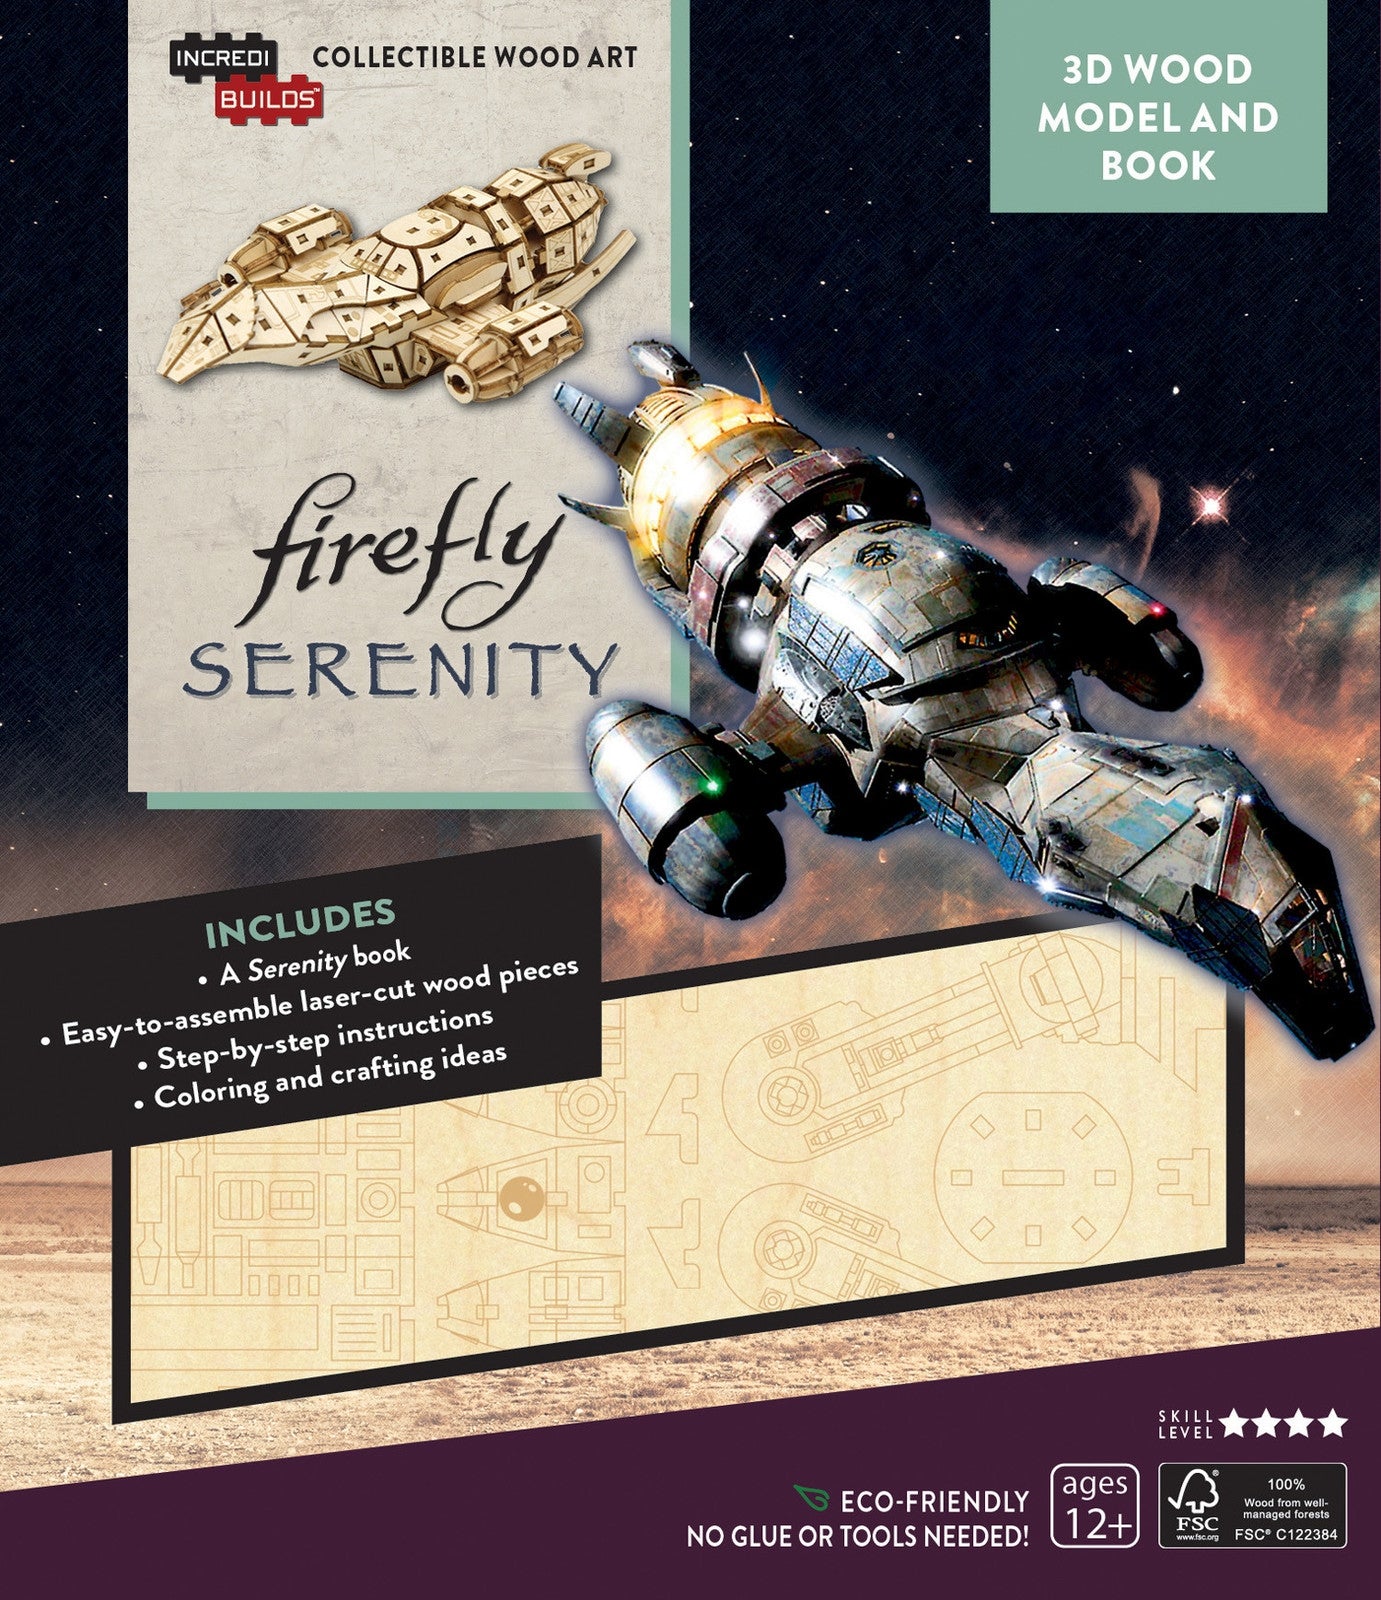 Firefly Serenity - Incredibuilds 3D Wood Model and Book